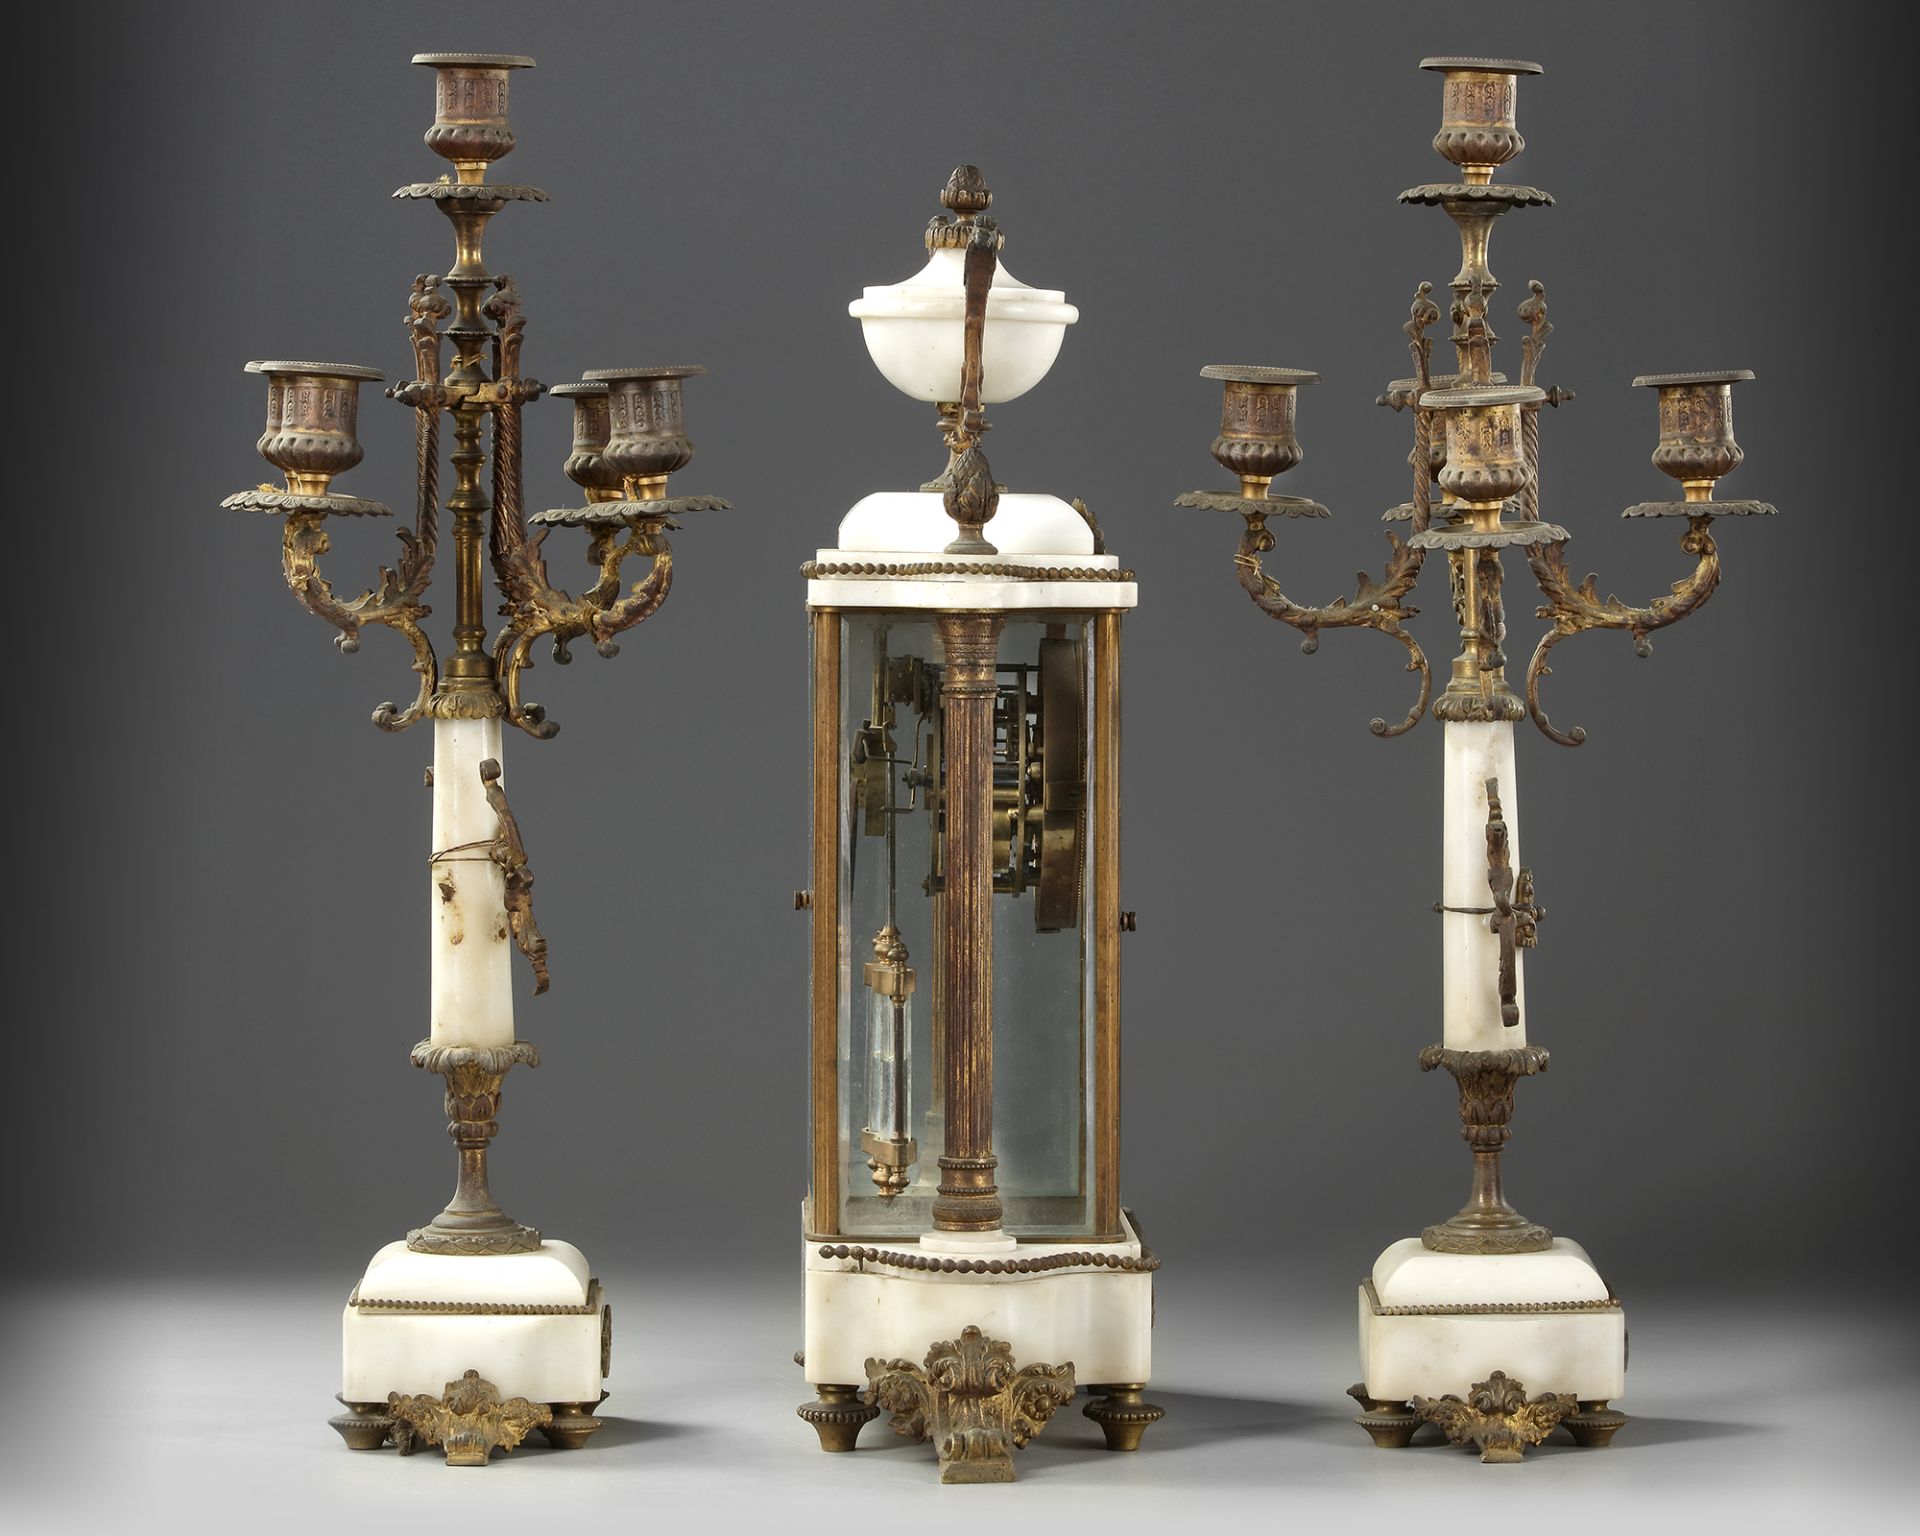 A FRENCH CLOCK SET, LATE 19TH CENTURY - Image 3 of 5